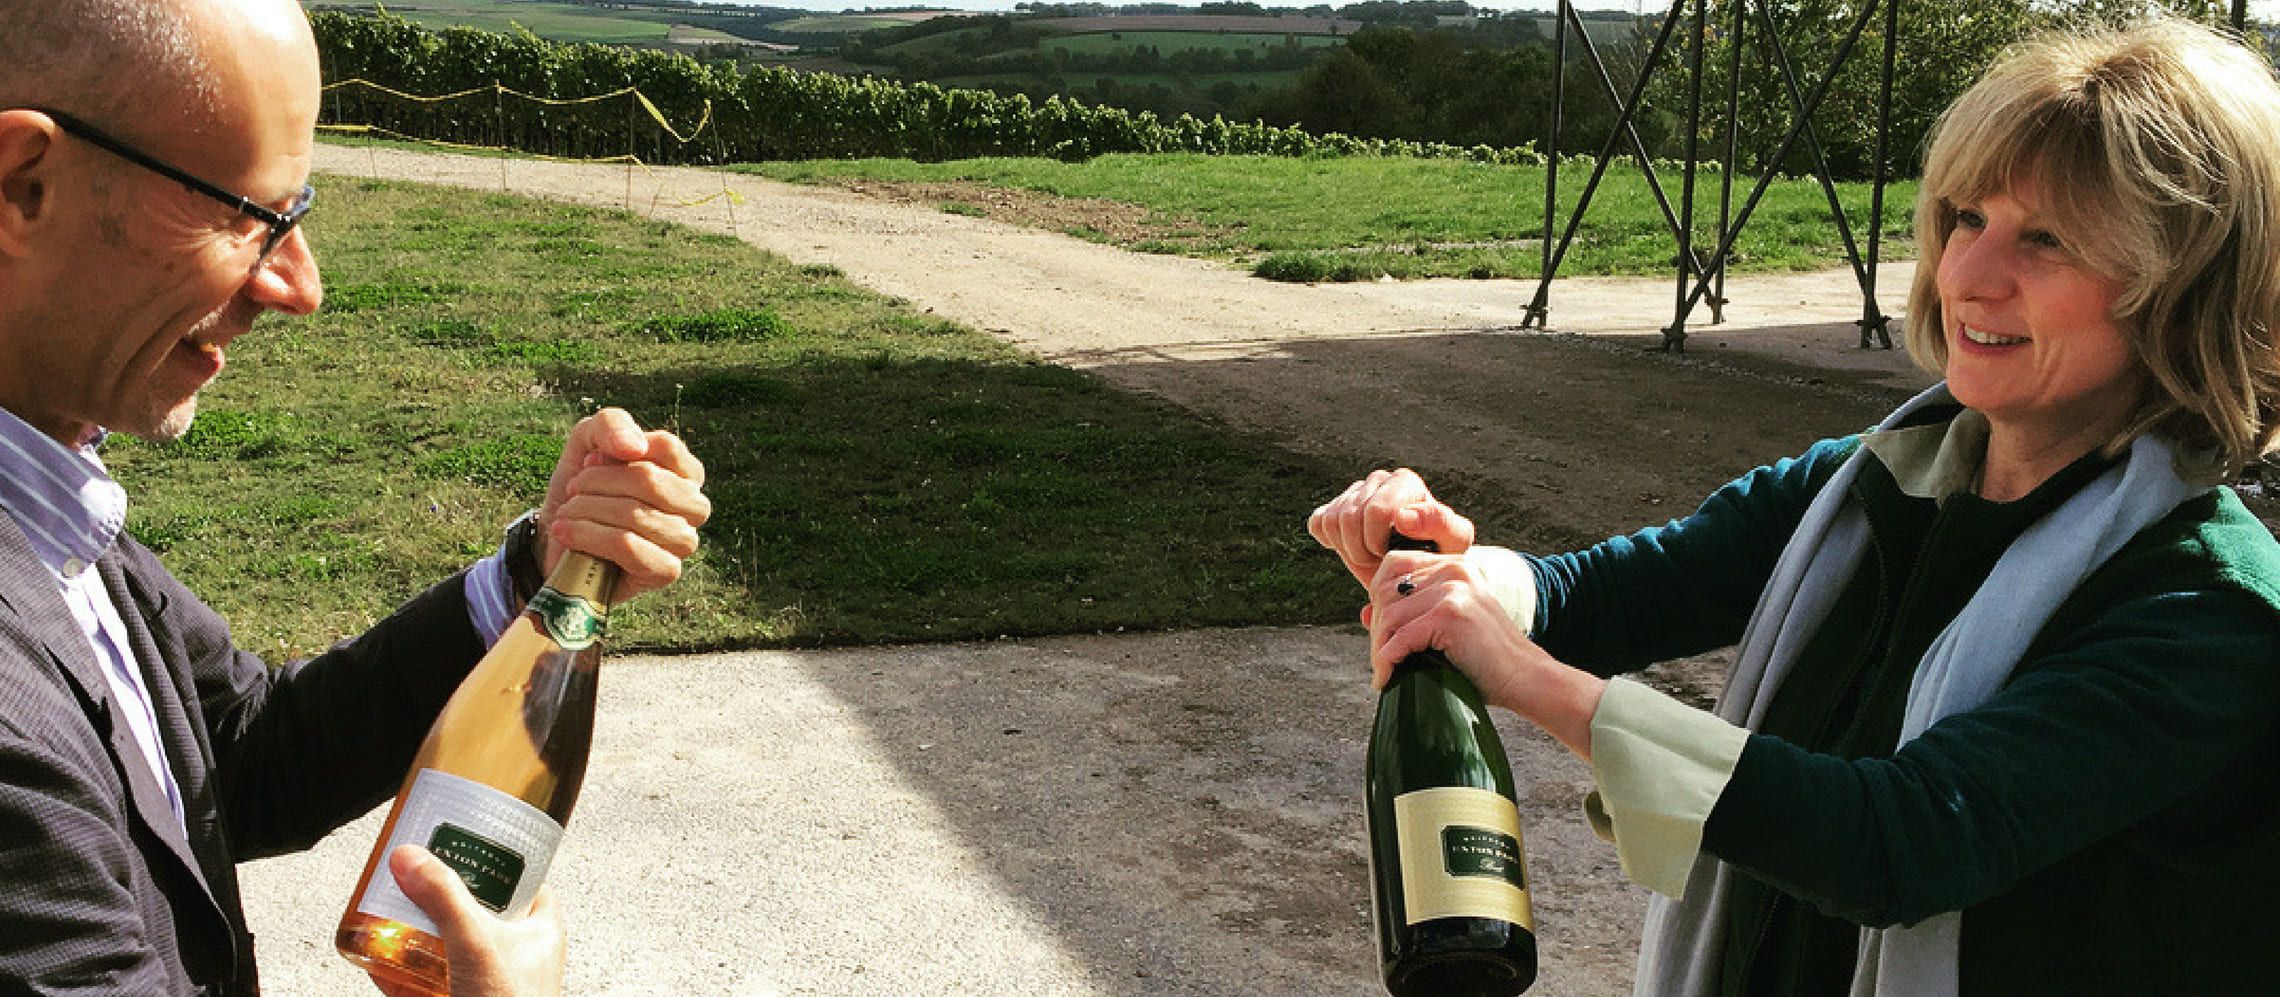 Photo for: 5 Best English Sparkling Wine Producers